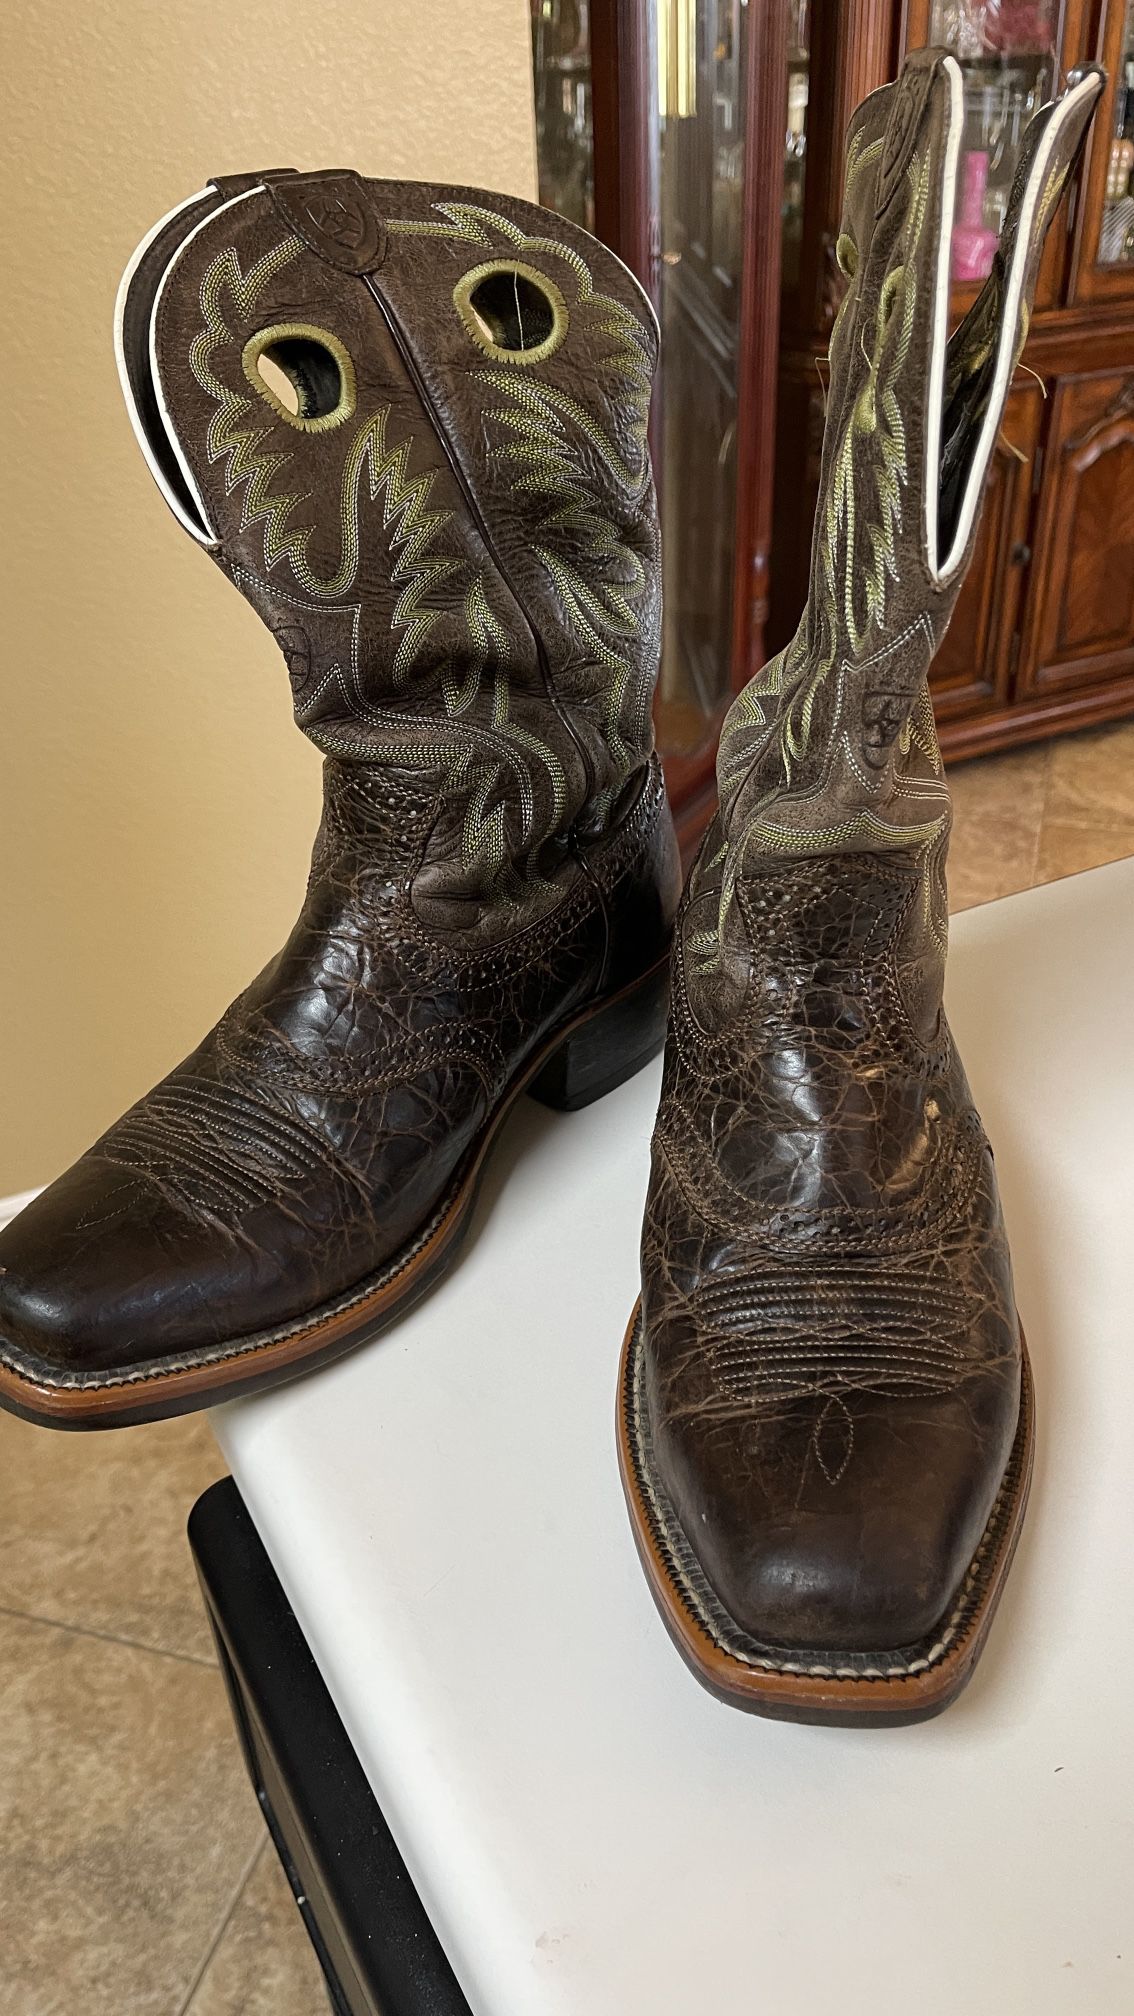 Ariat Men's Heritage Roughstock Square Toe mens cowboy western boots size 10.5D